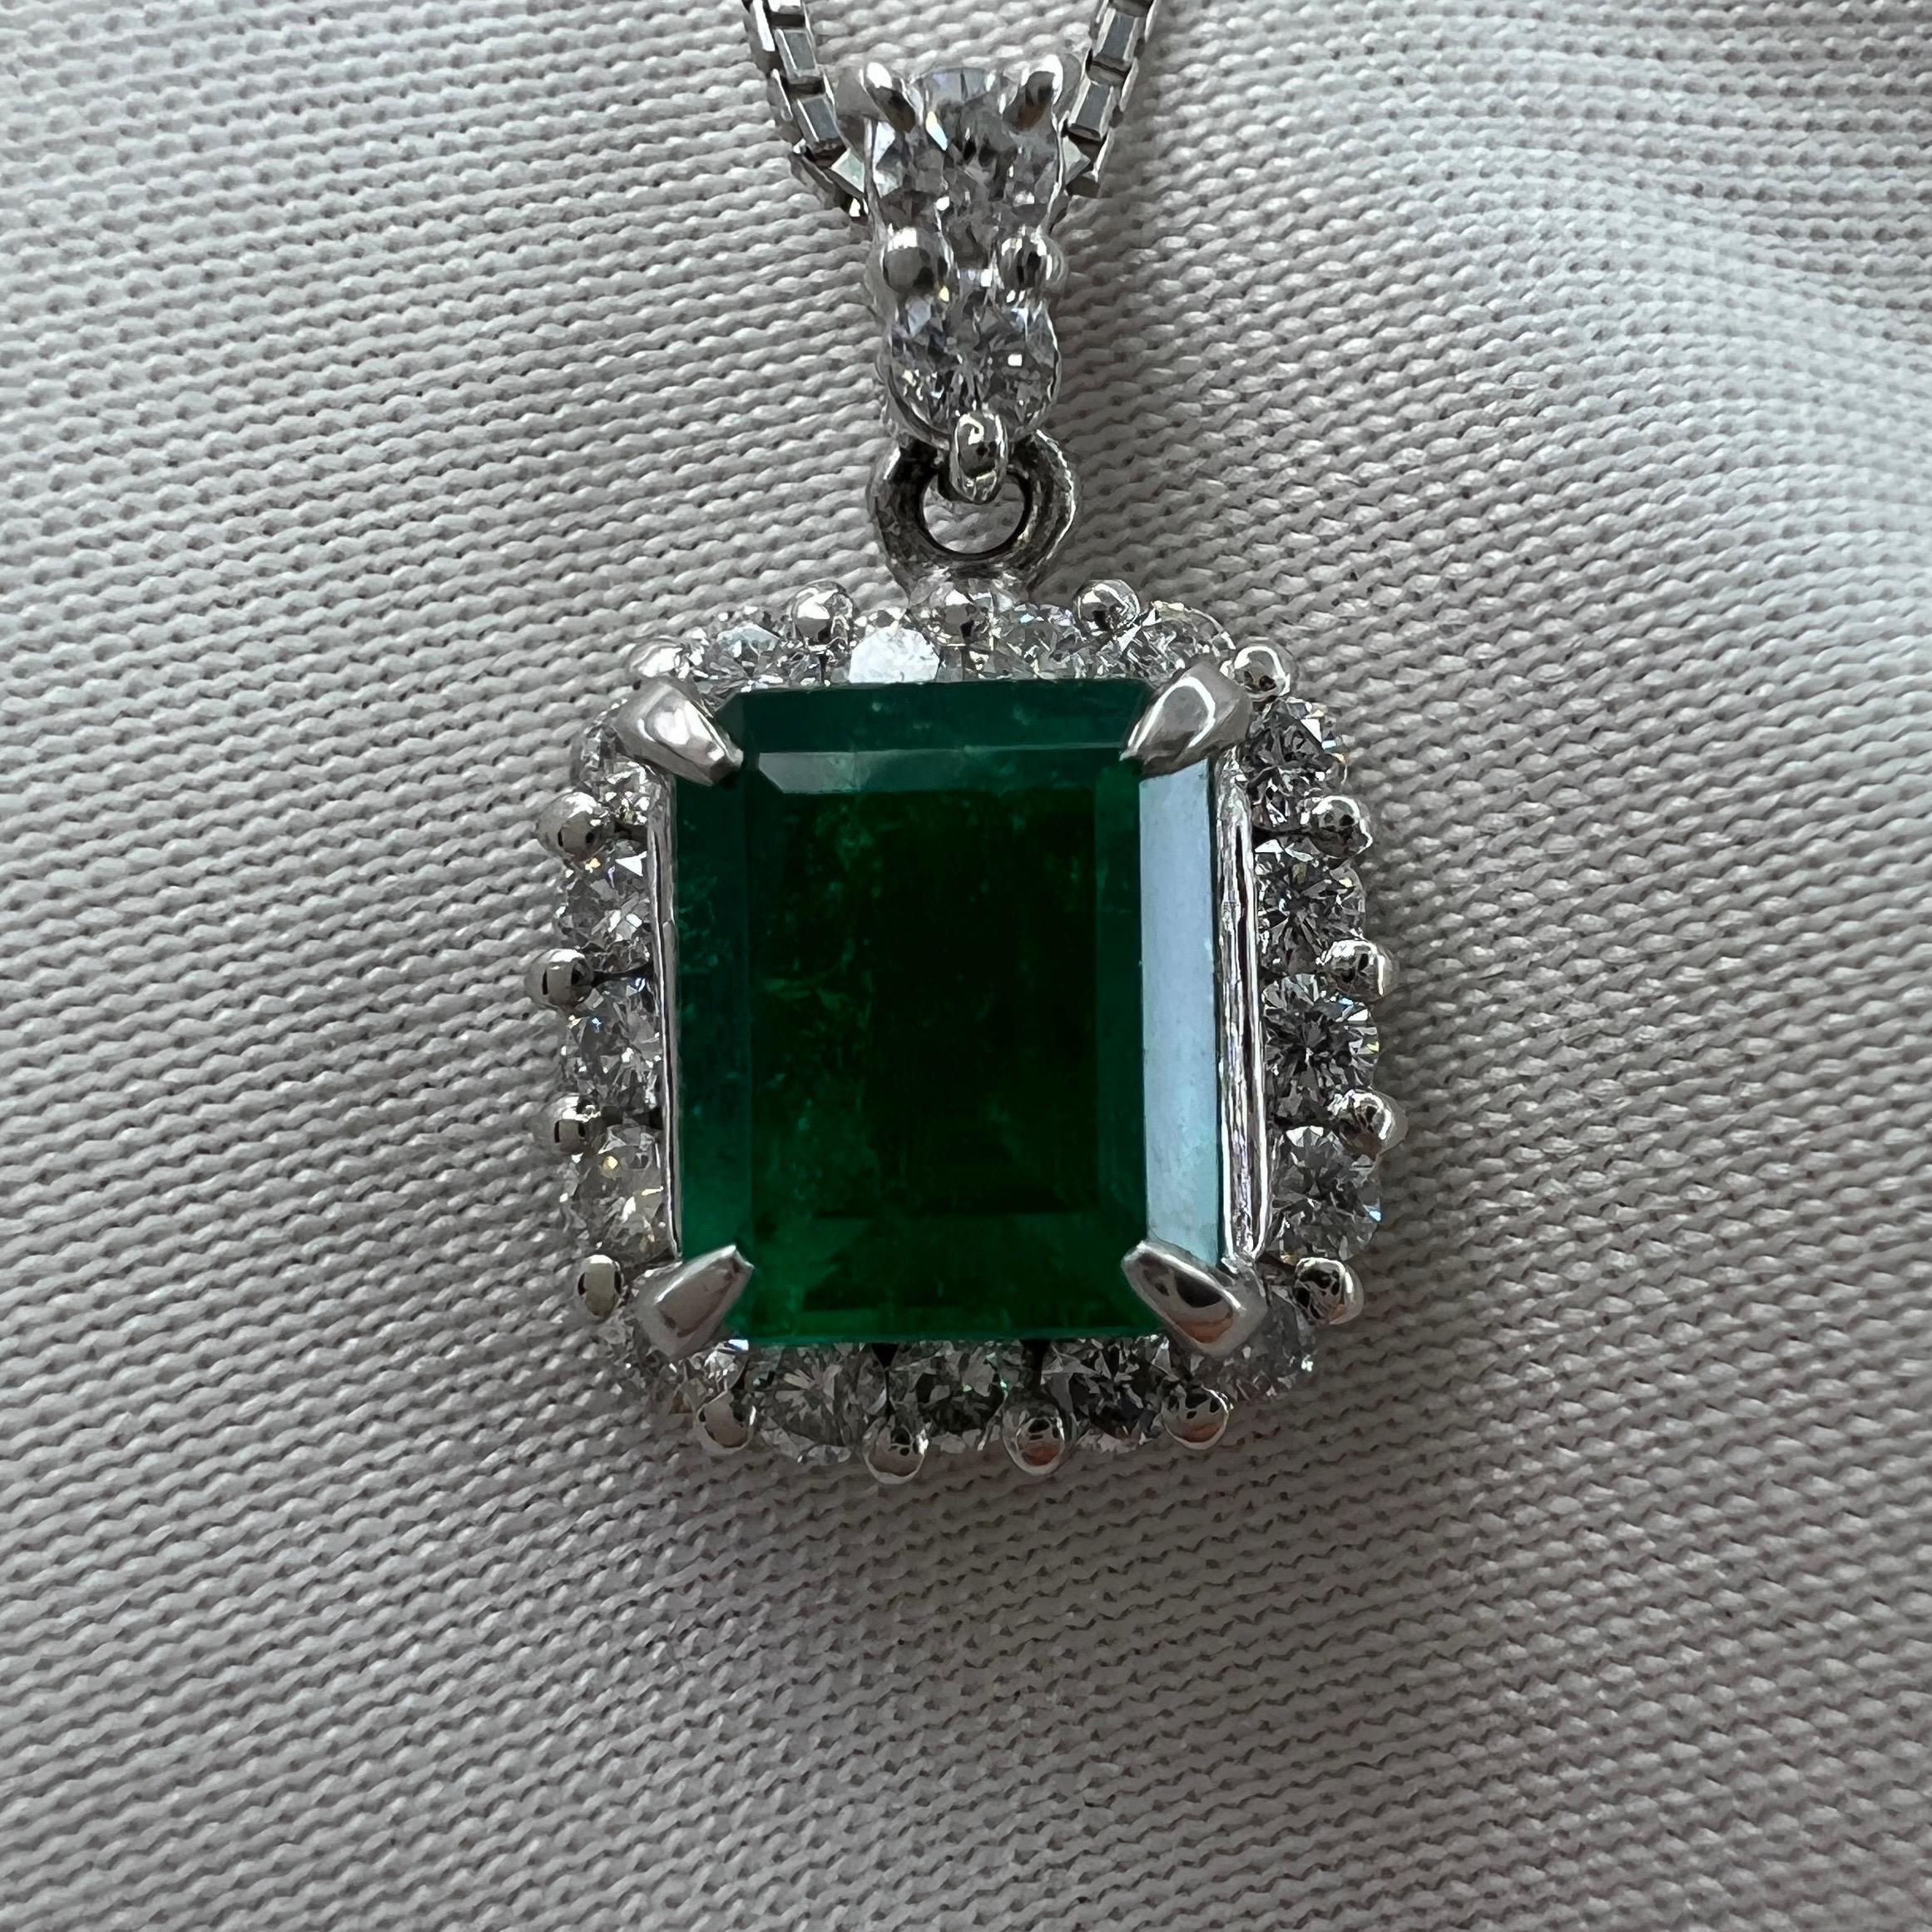 Natural Vivid Green Colombian Emerald & Diamond Platinum Cluster Pendant Necklace.

1.04 Carat Colombian emerald with a fine, vivid intense green colour and very good clarity. Some small natural inclusions visible when looking closely (as expected